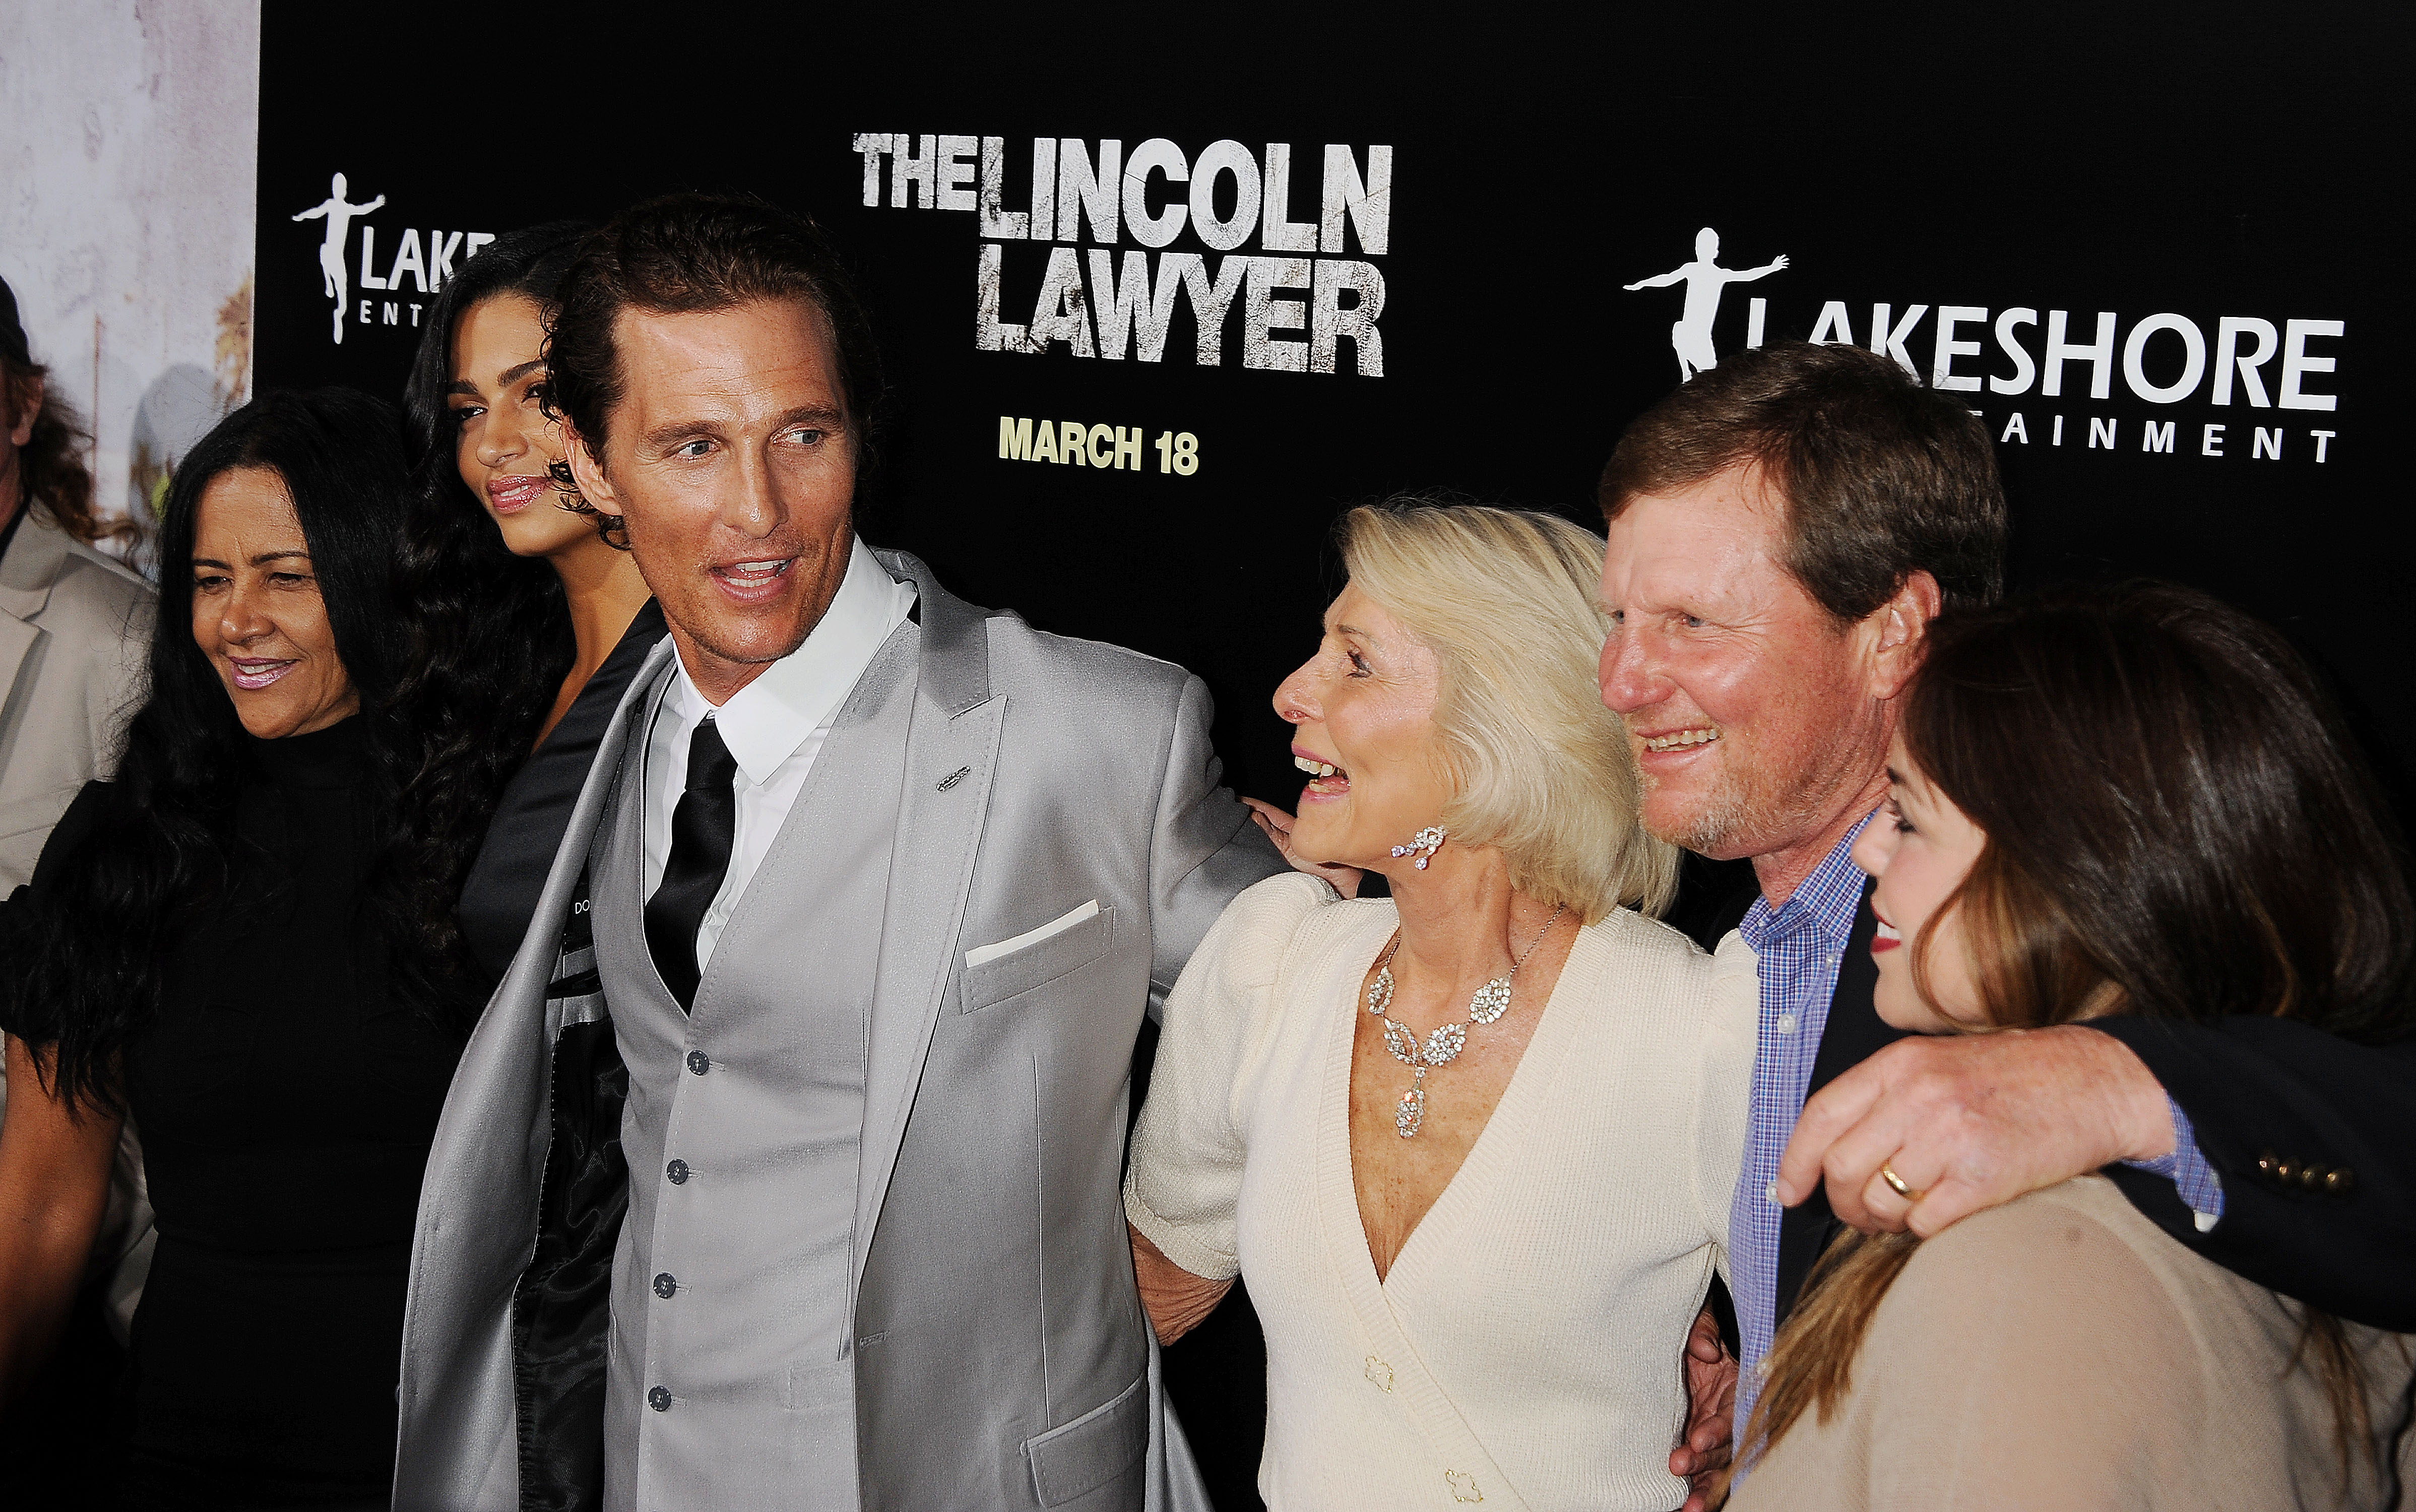 Camila Alves, Matthew McConaughey, Kay McConaughey, Mike McConaughey and arrive at the "The Lincoln Lawyer" Los Angeles screening at ArcLight Cinemas, on March 10, 2011, in Hollywood, California. | Source: Getty Images